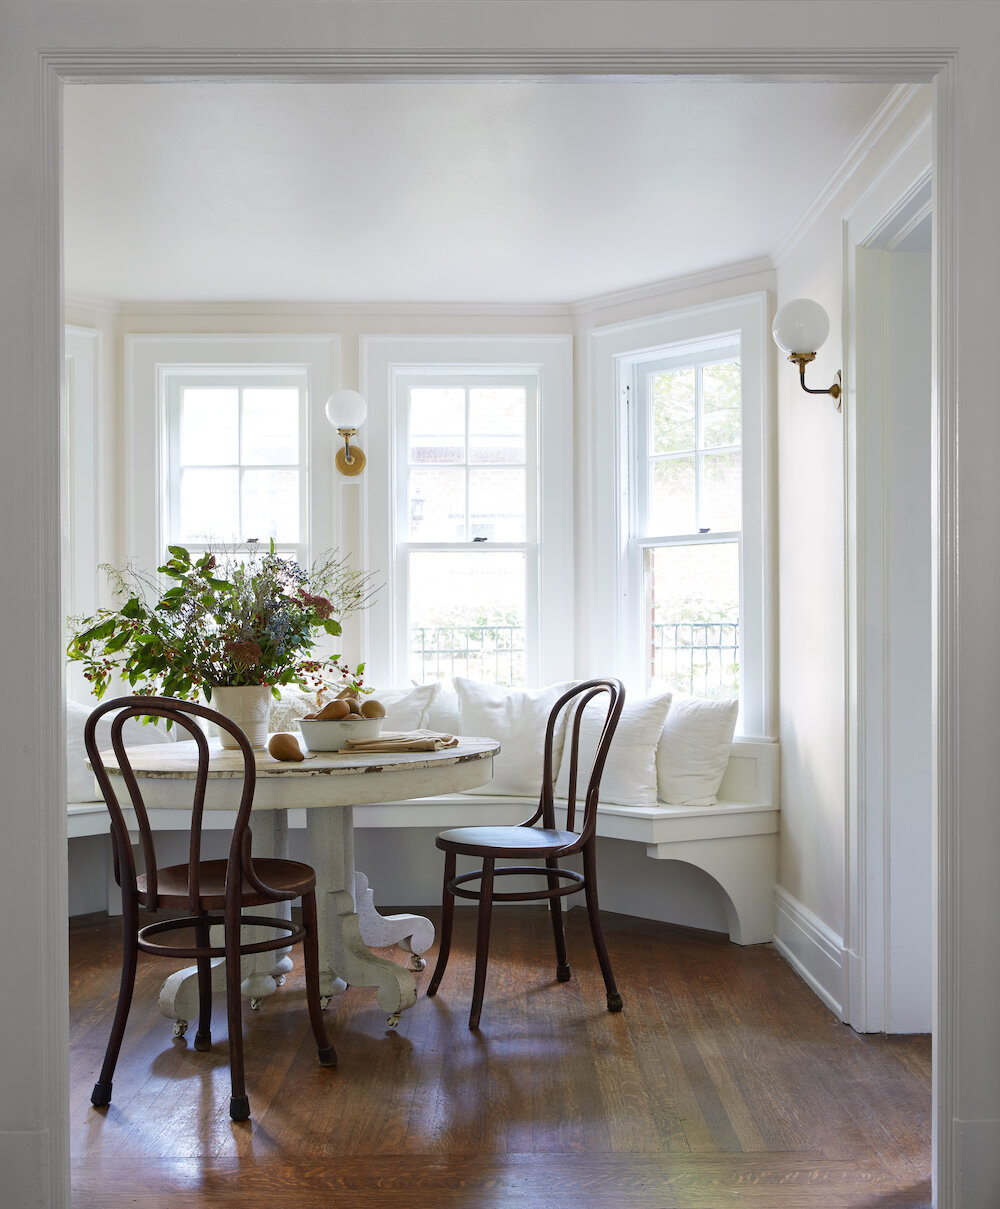 Delicate White (PPG paint color) in a beautiful breakfast nook with bay window - Leanne Ford design.